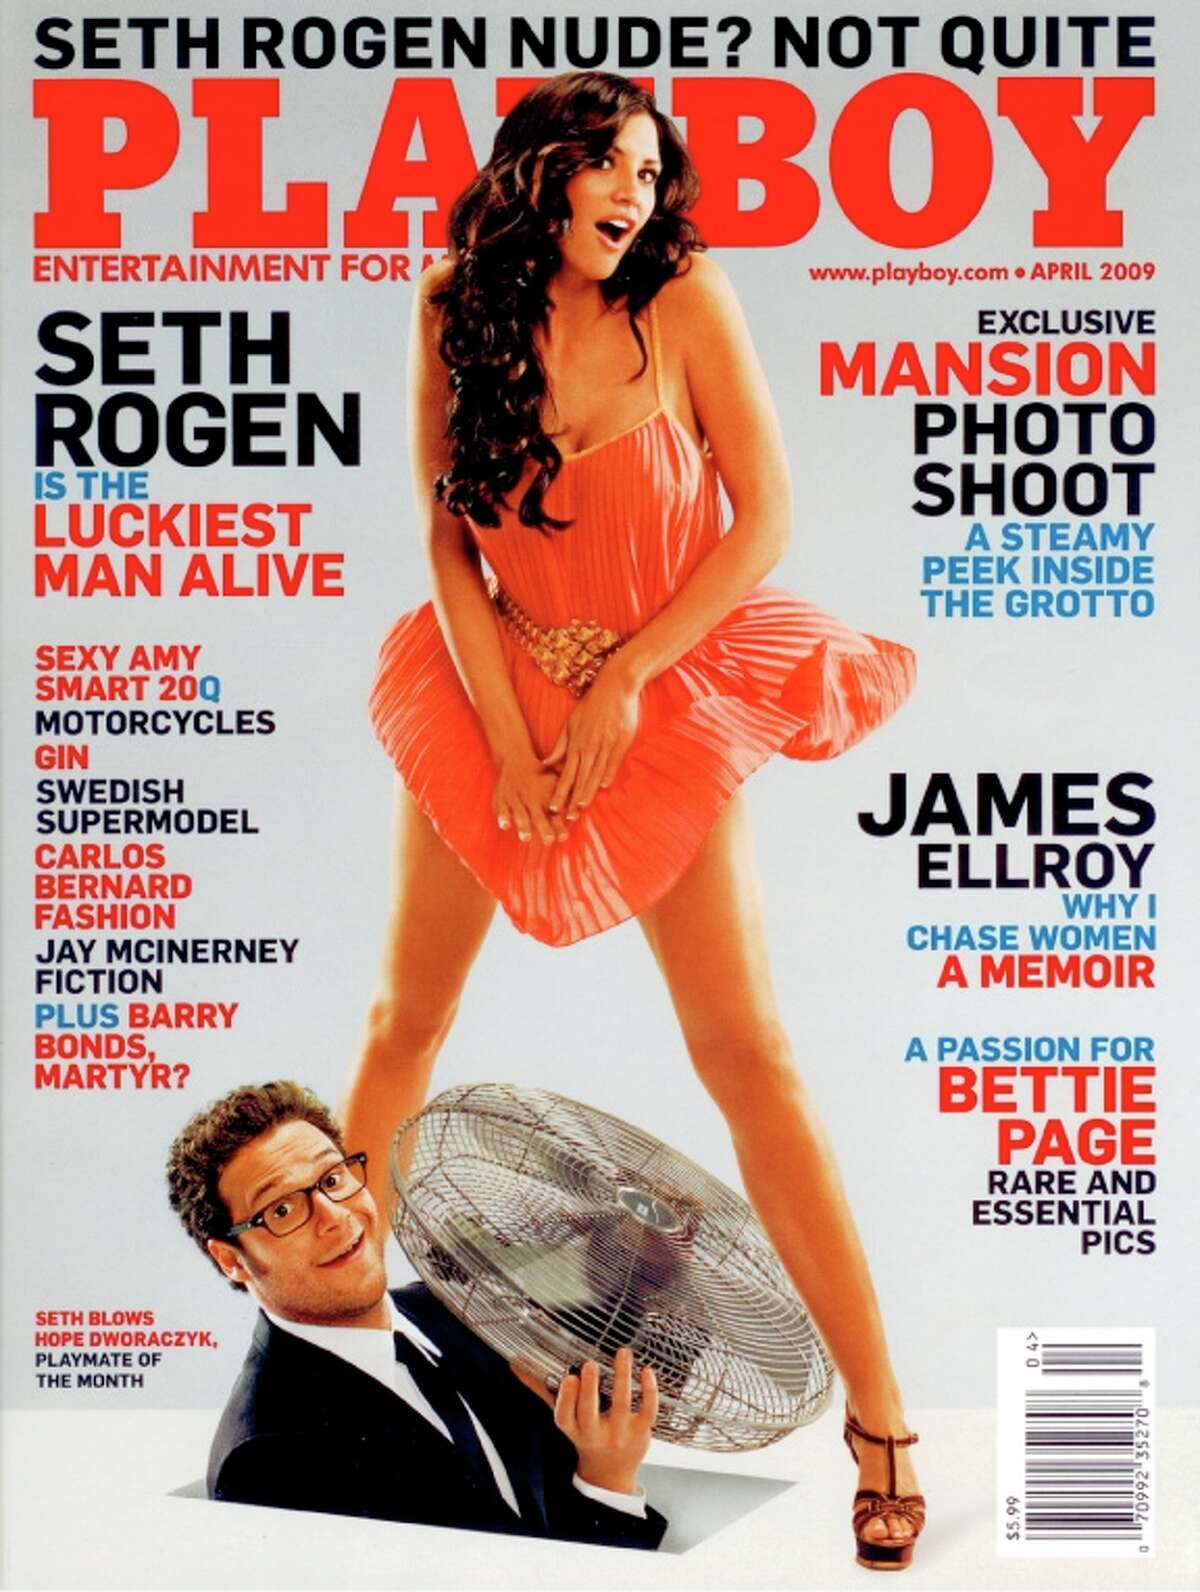 Playboy at 60 iconic covers